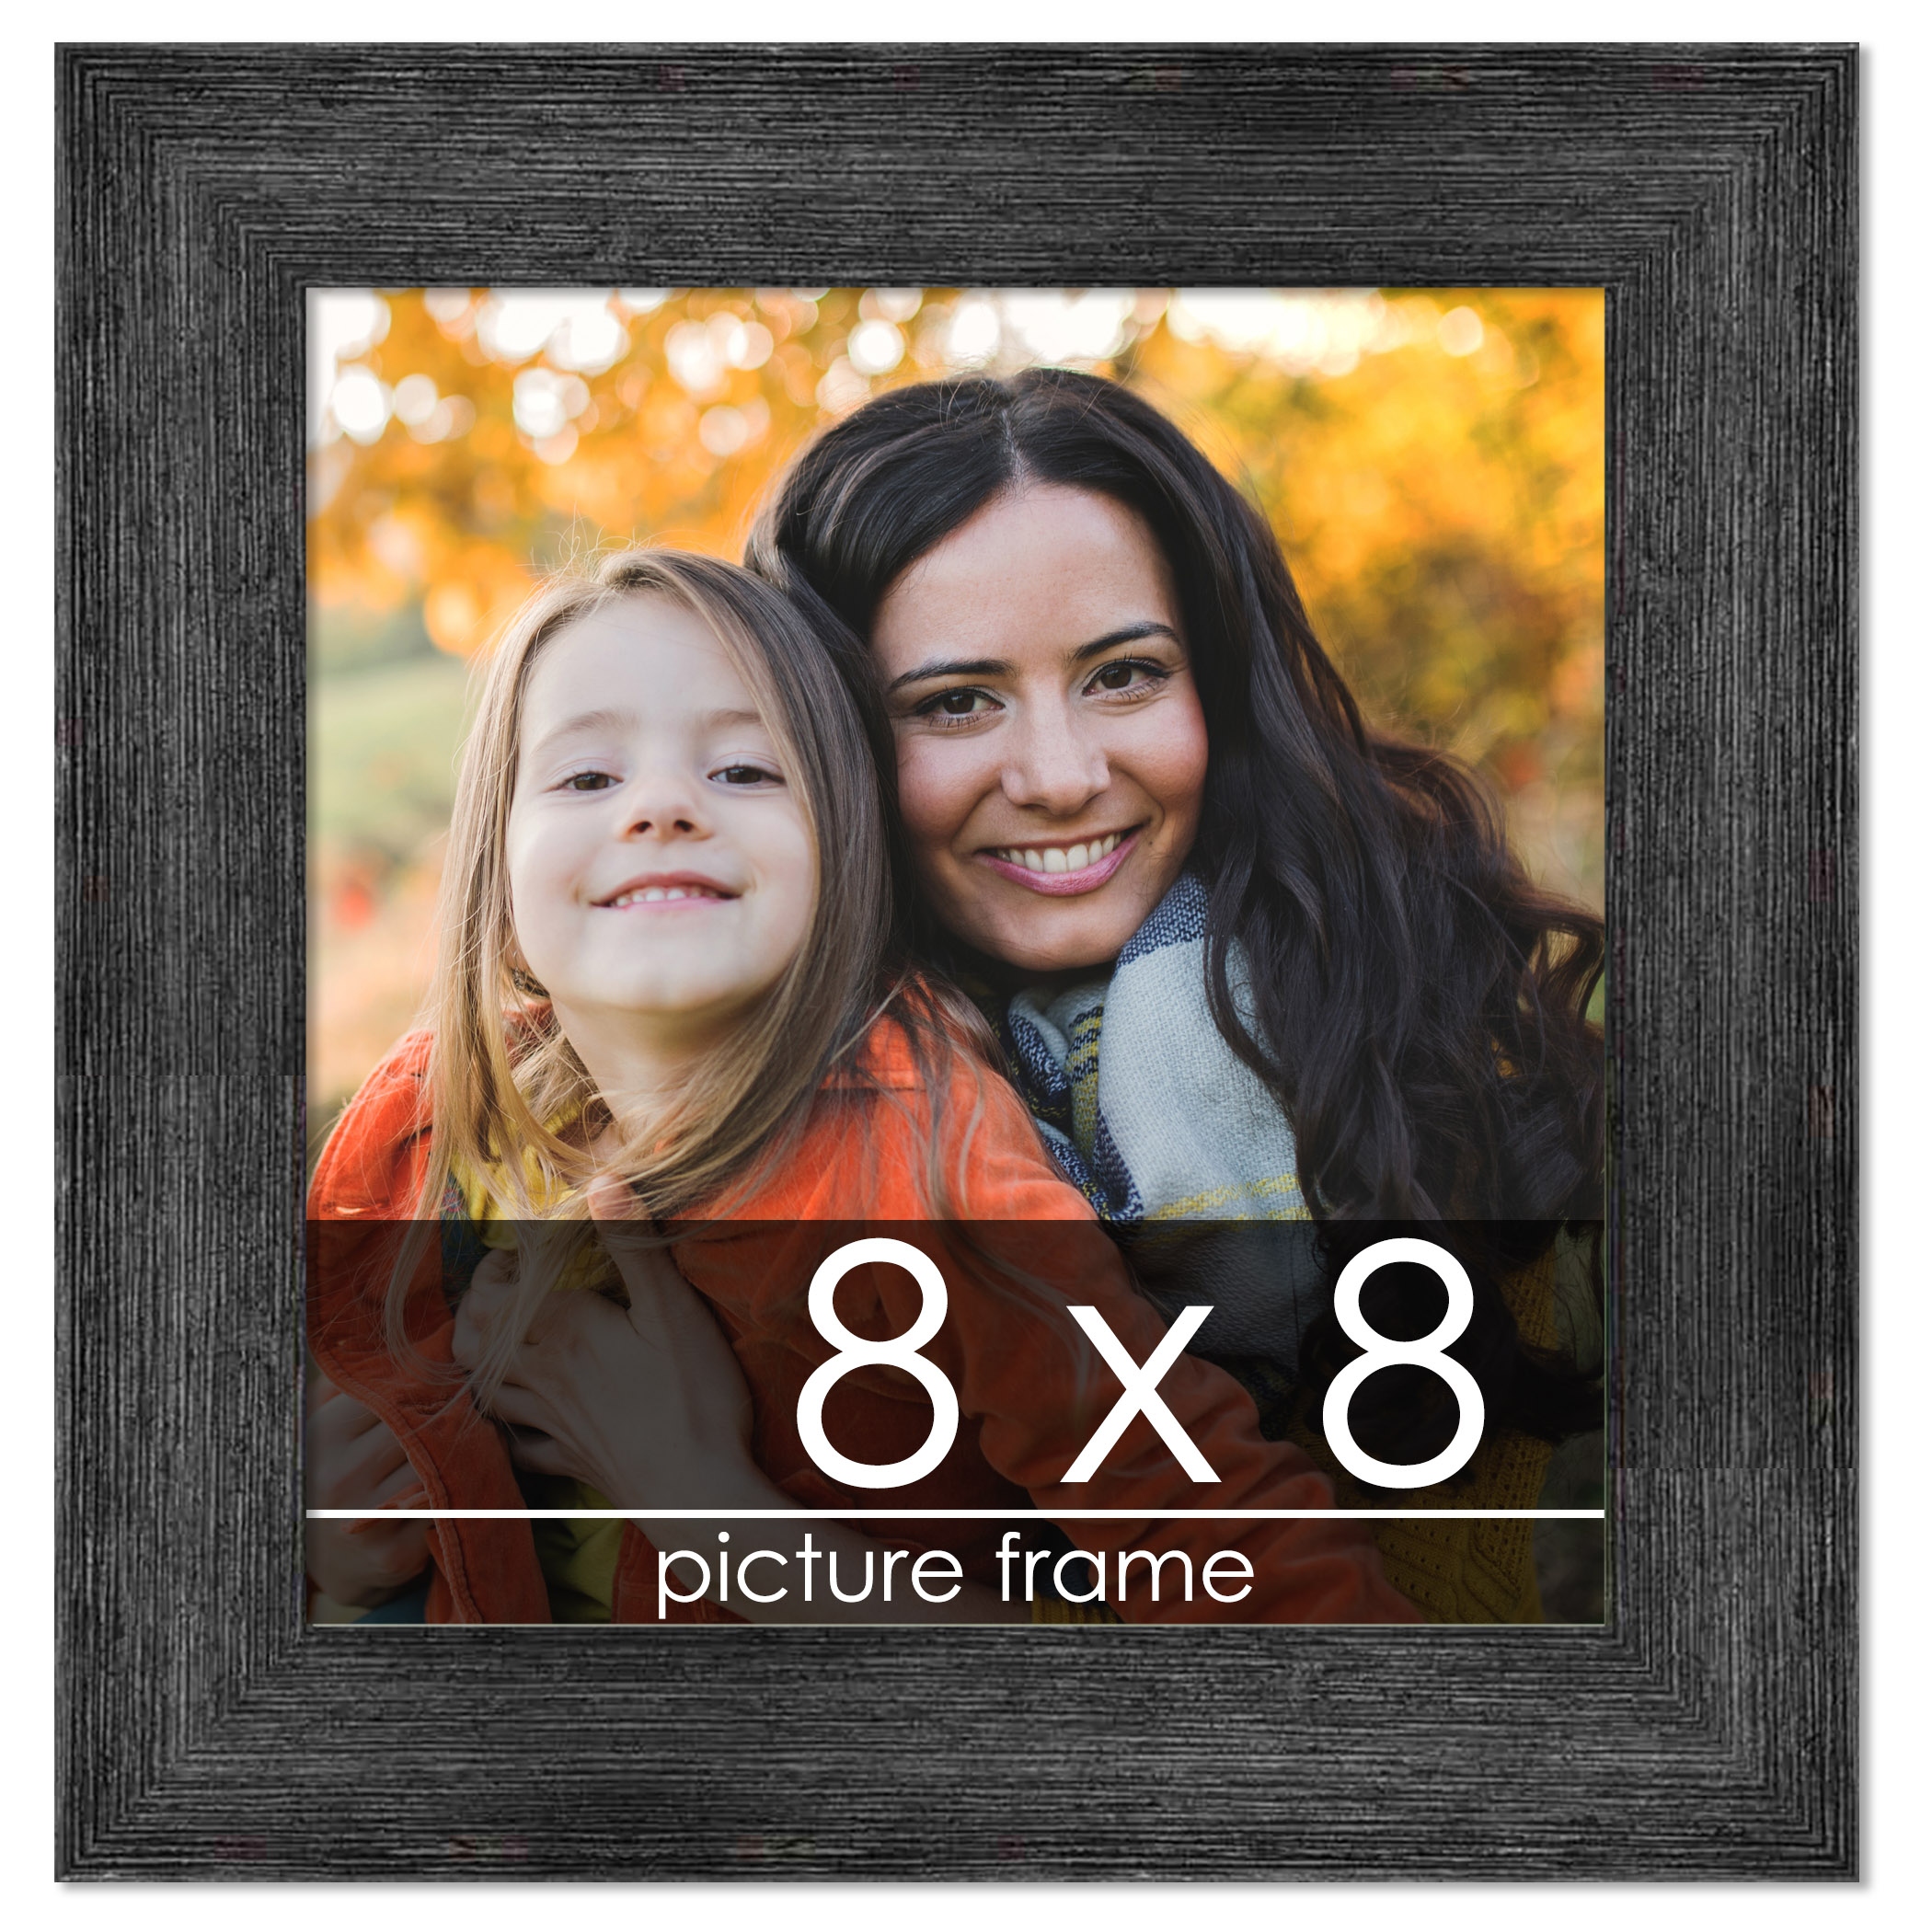 8x8 Distressed/Aged Black Wood Picture Square Frame - Picture